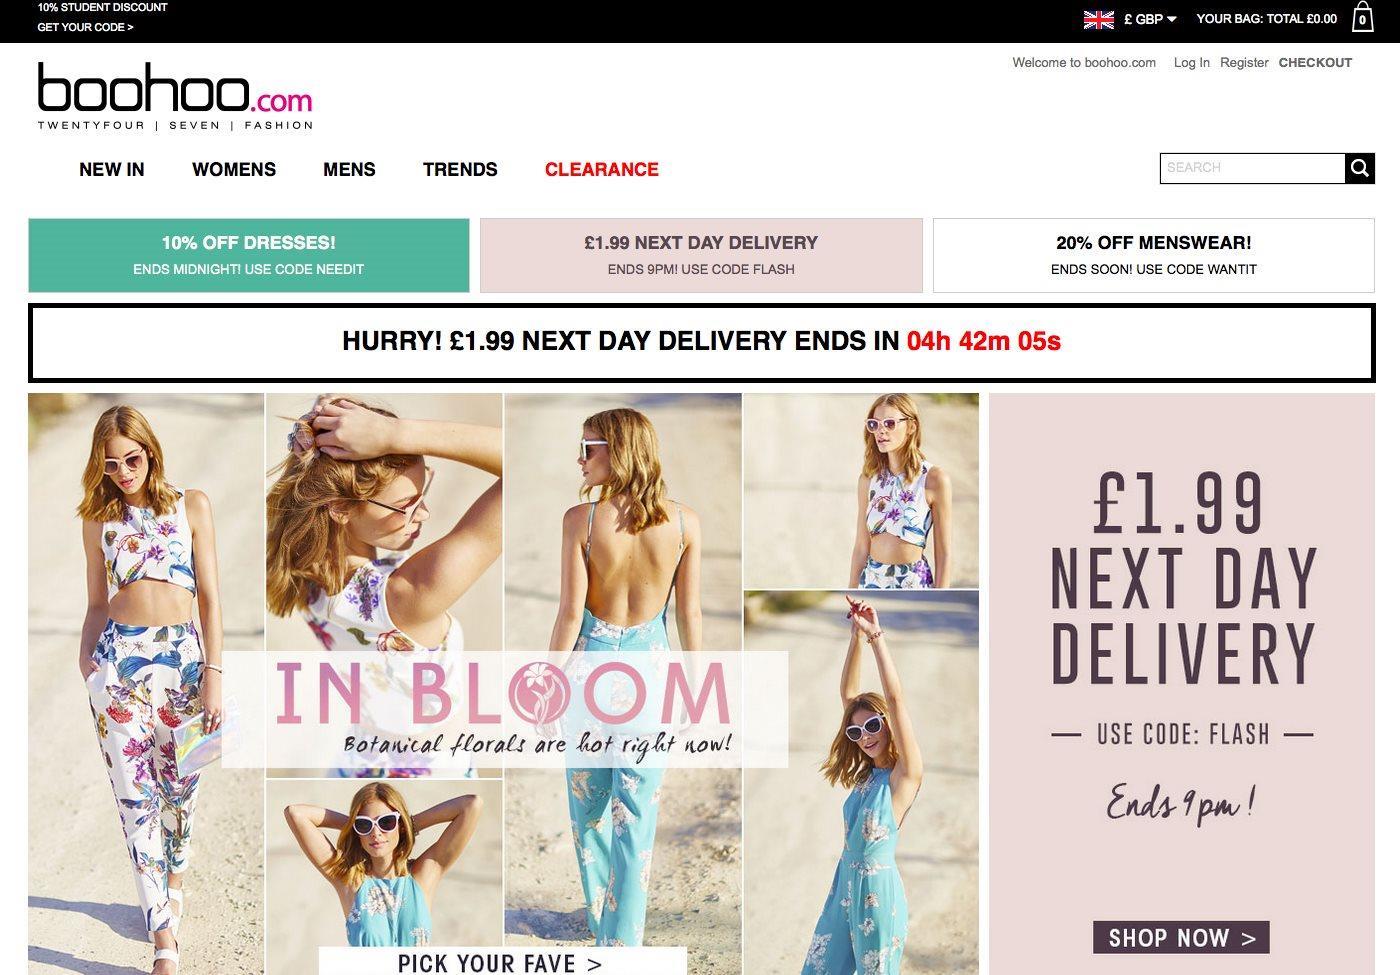 Boohoo defends itself after Channel 4 exposé, News